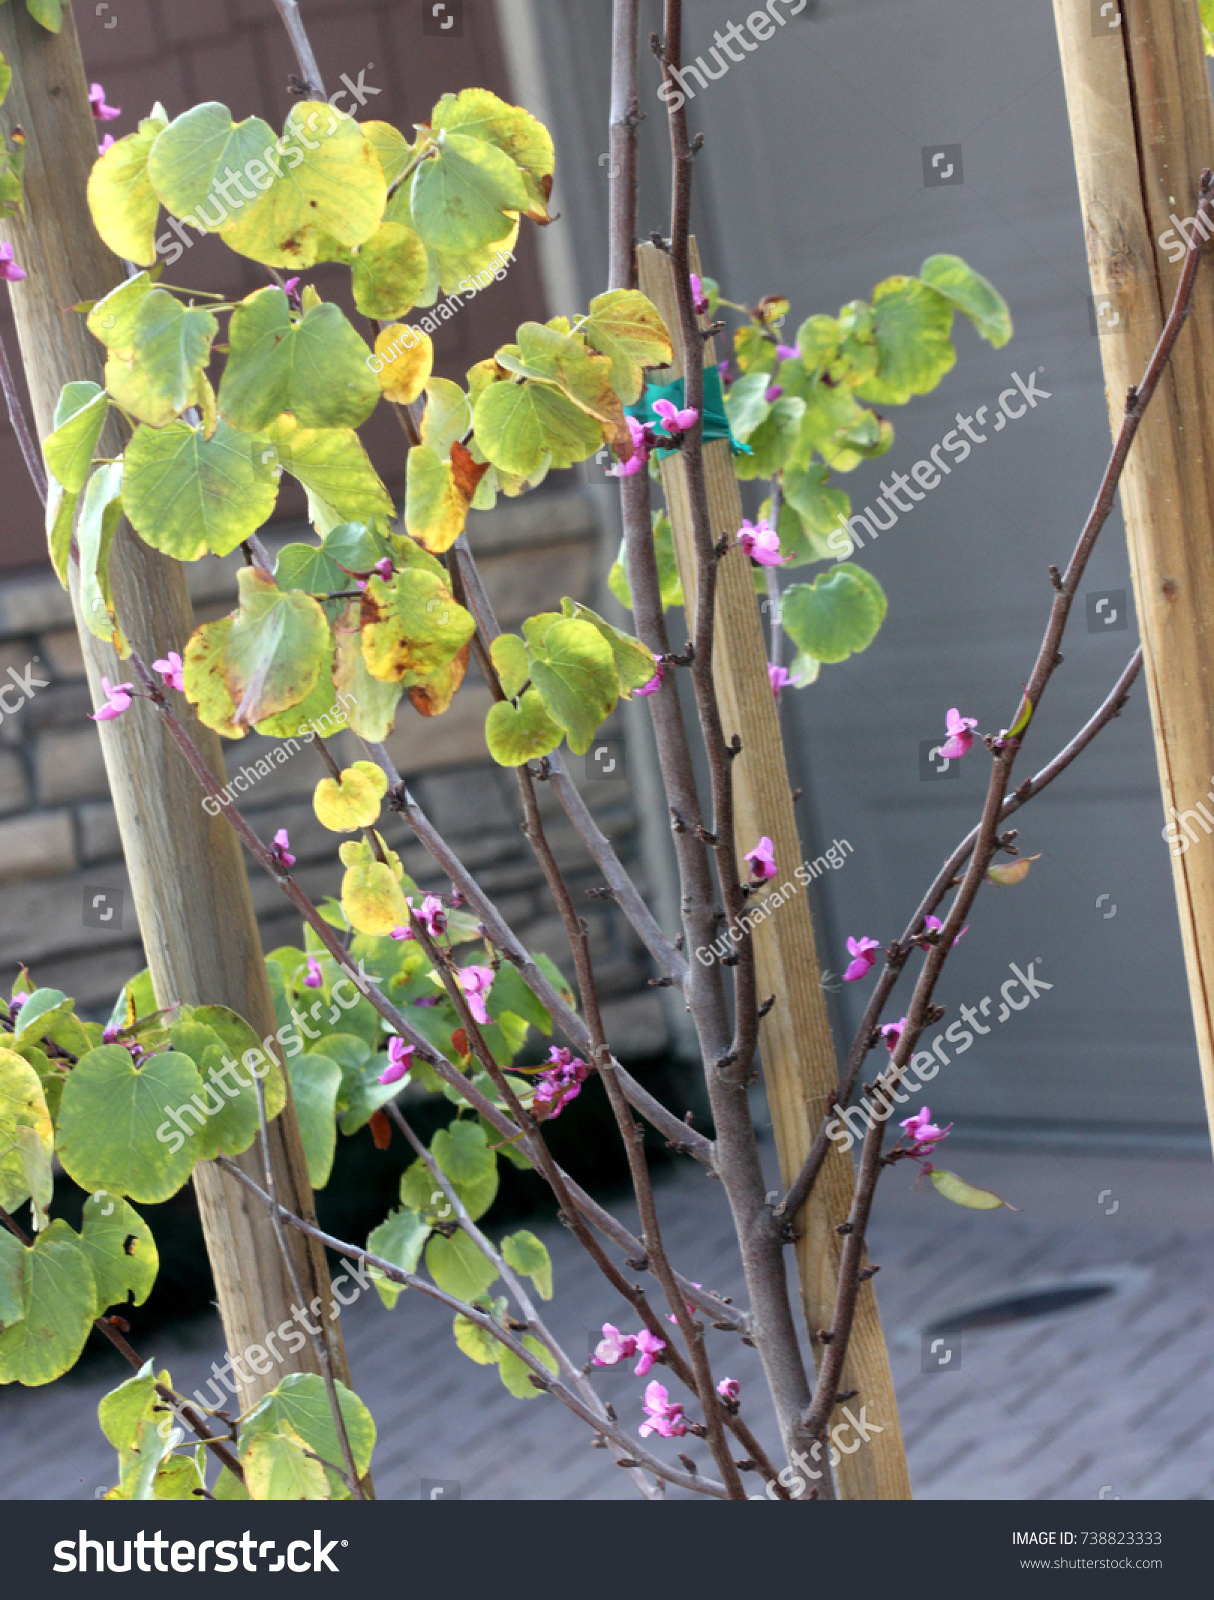 Western redbud California redbud Cercis occidentalis.Small deciduous tree. American native with rounded or notched small leaves and purple flowers in nearly sessile clusters, pods flattened. #738823333